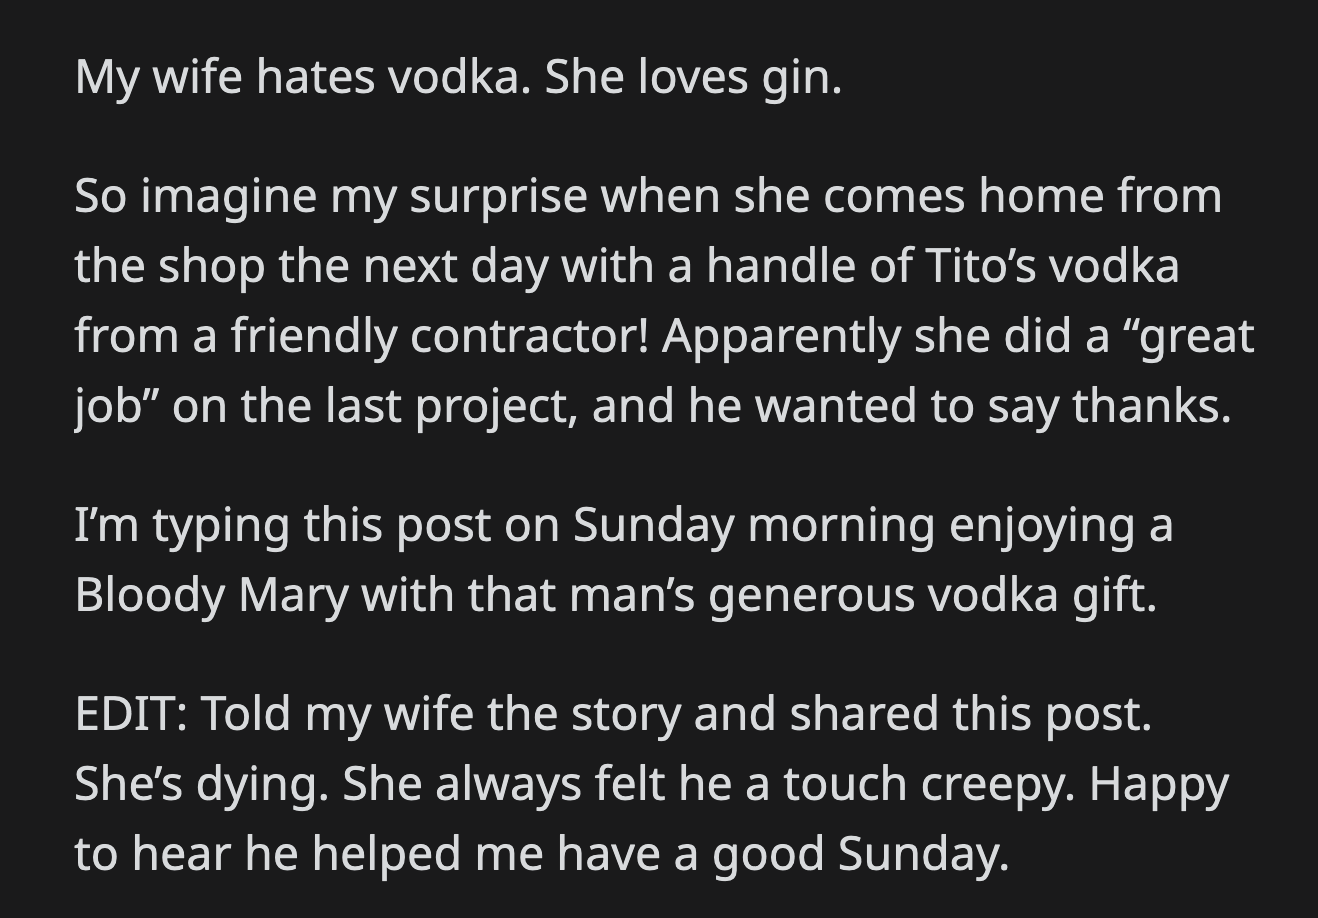 The next day, OP's wife went home with a bottle of vodka courtesy of the sleazy contractor. His wife's love for gin slipped OP's mind when the contractor asked about her drink of choice. OP had a great Sunday morning drink thanks to the contractor.